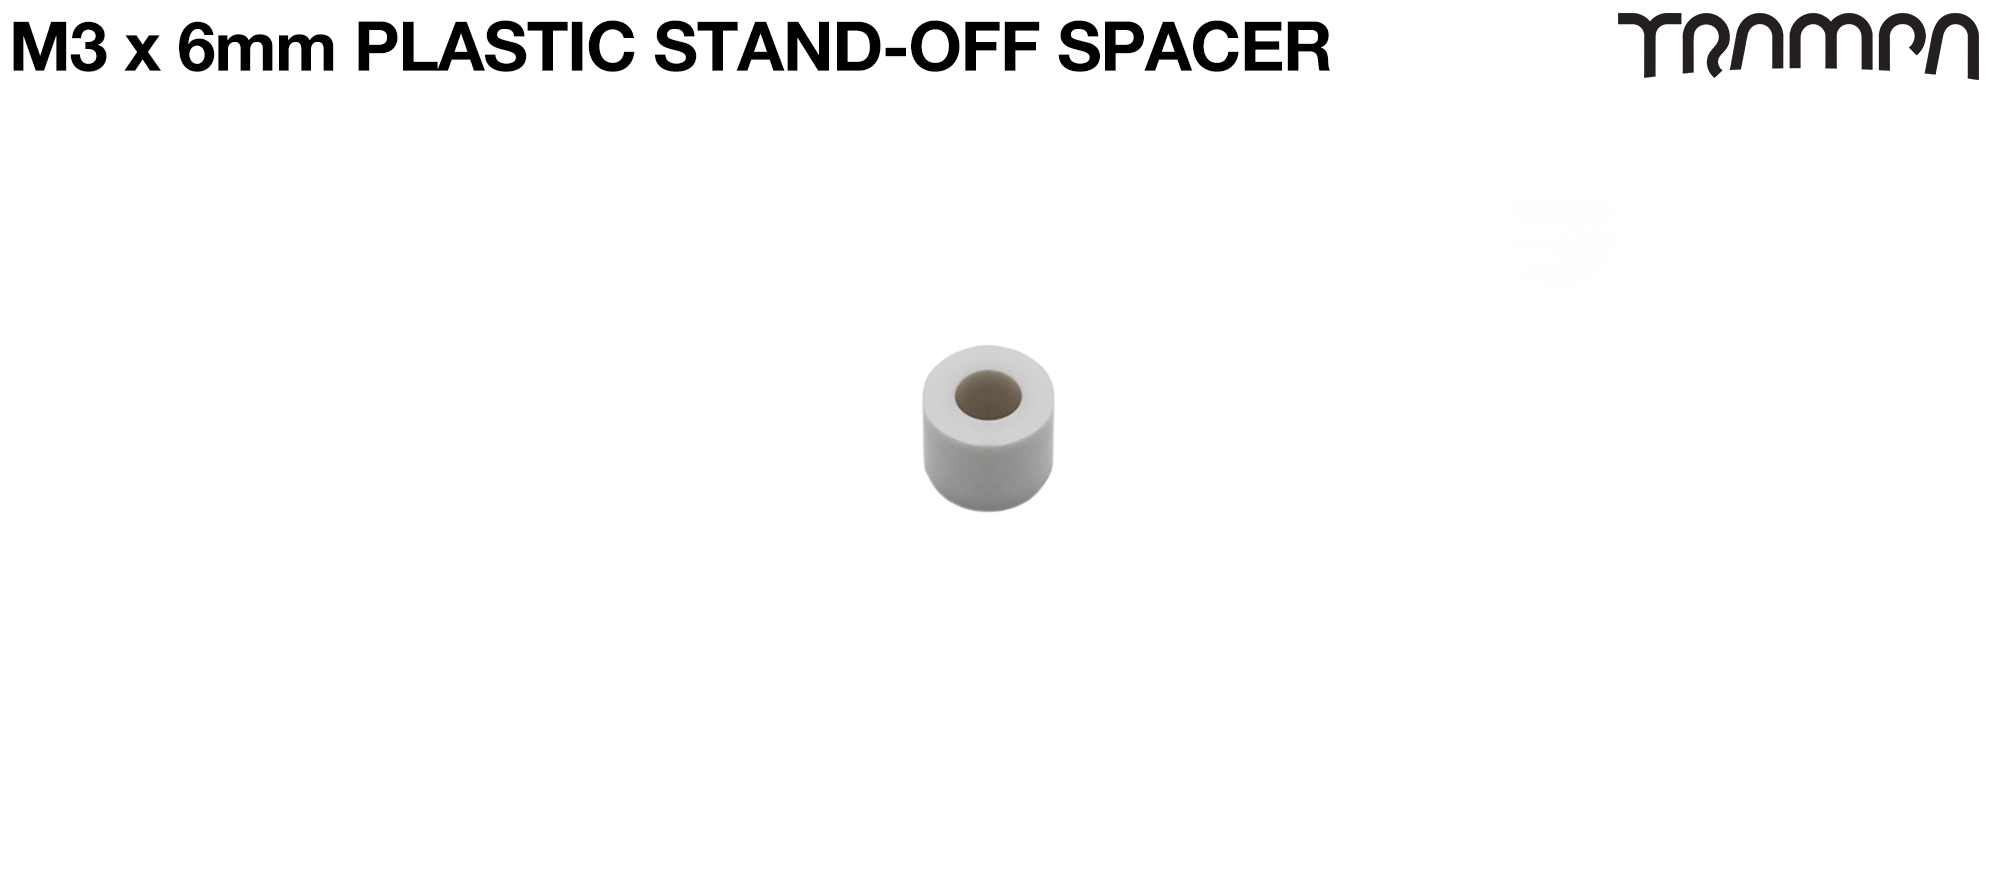 M3 x 6mm Plastic Stand-off Spacer